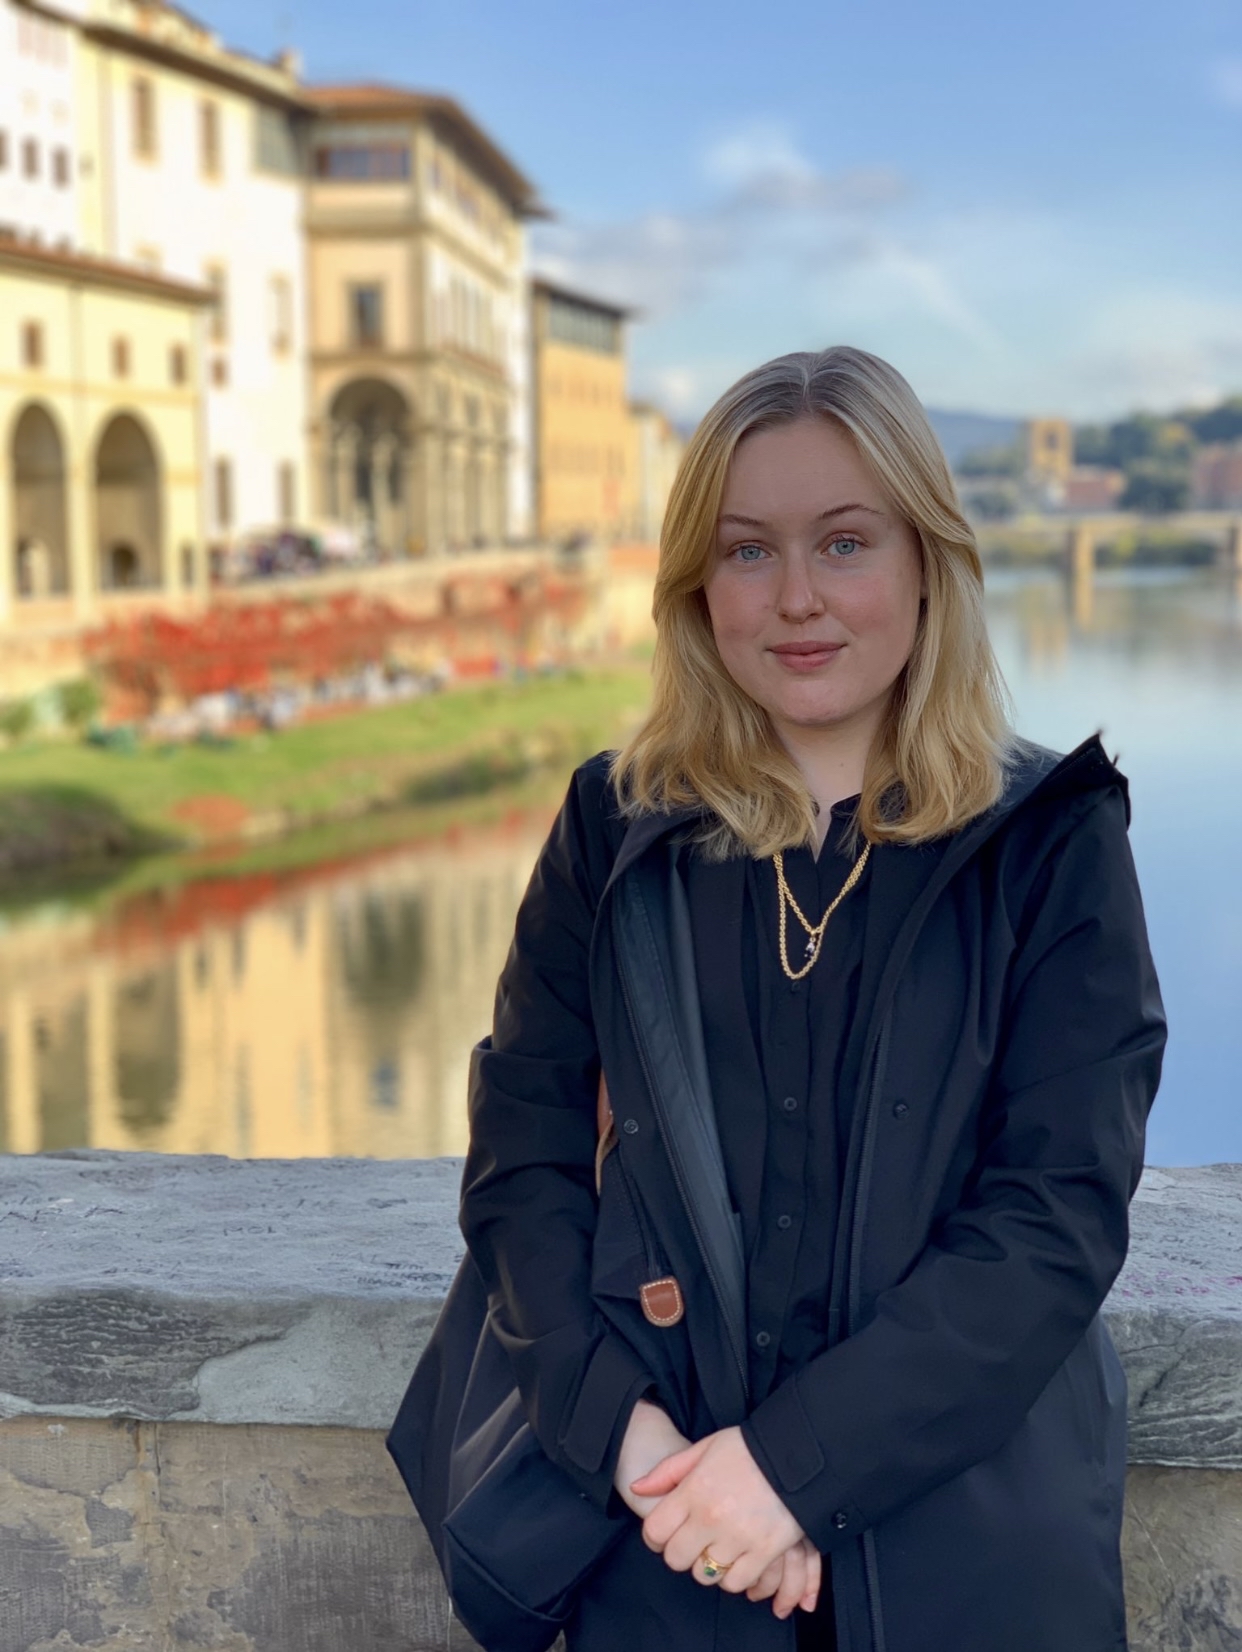 Former Human Rights Law Clinic student and LLM graduate Emma Lennhammer leaning against a low wall, with a background of blue sky reflected in the water of a river running by buildings with arched architecture and flowers.